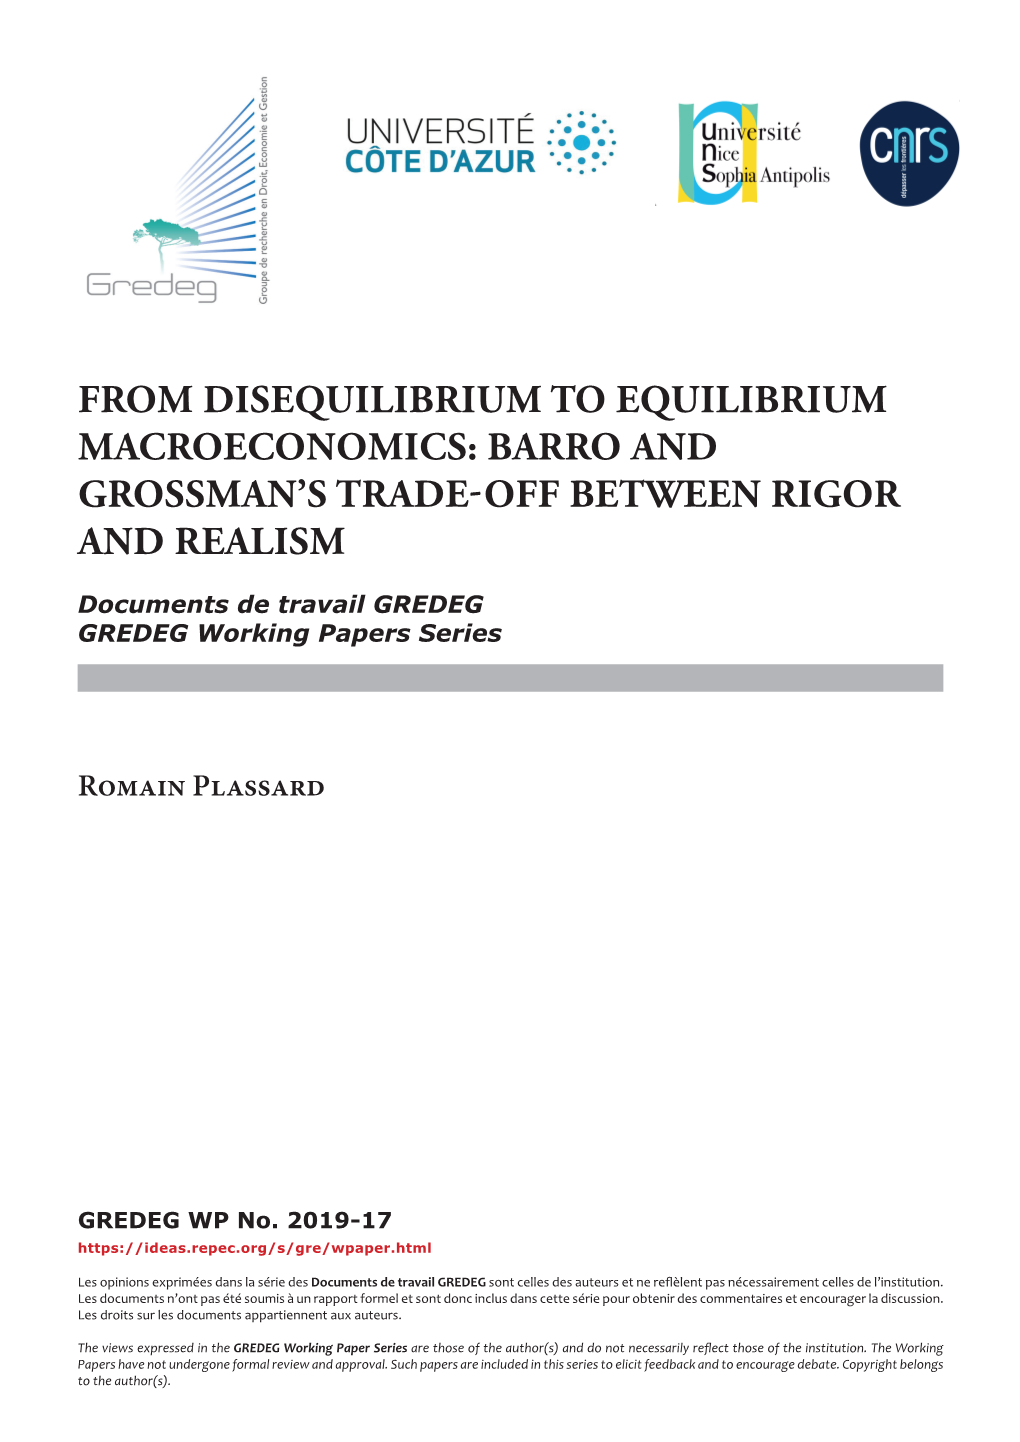 From Disequilibrium to Equilibrium Macroeconomics: Barro and Grossman’S Trade-Off Between Rigor and Realism